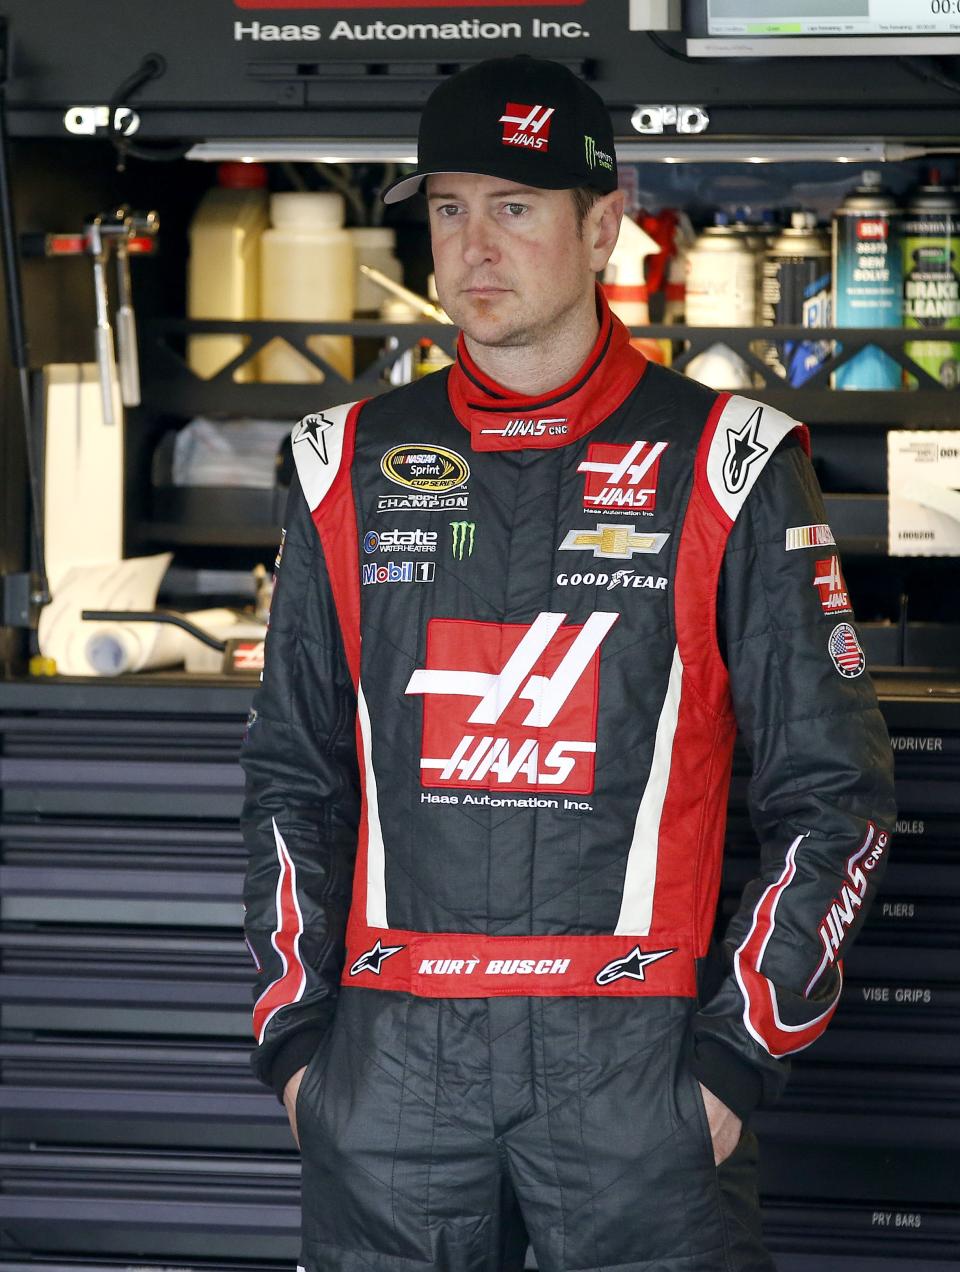 Kurt Busch stands by himself in the garage during NASCAR Sprint Cup auto racing practice Saturday, March 1, 2014, in Avondale, Ariz. (AP Photo/Ross D. Franklin)